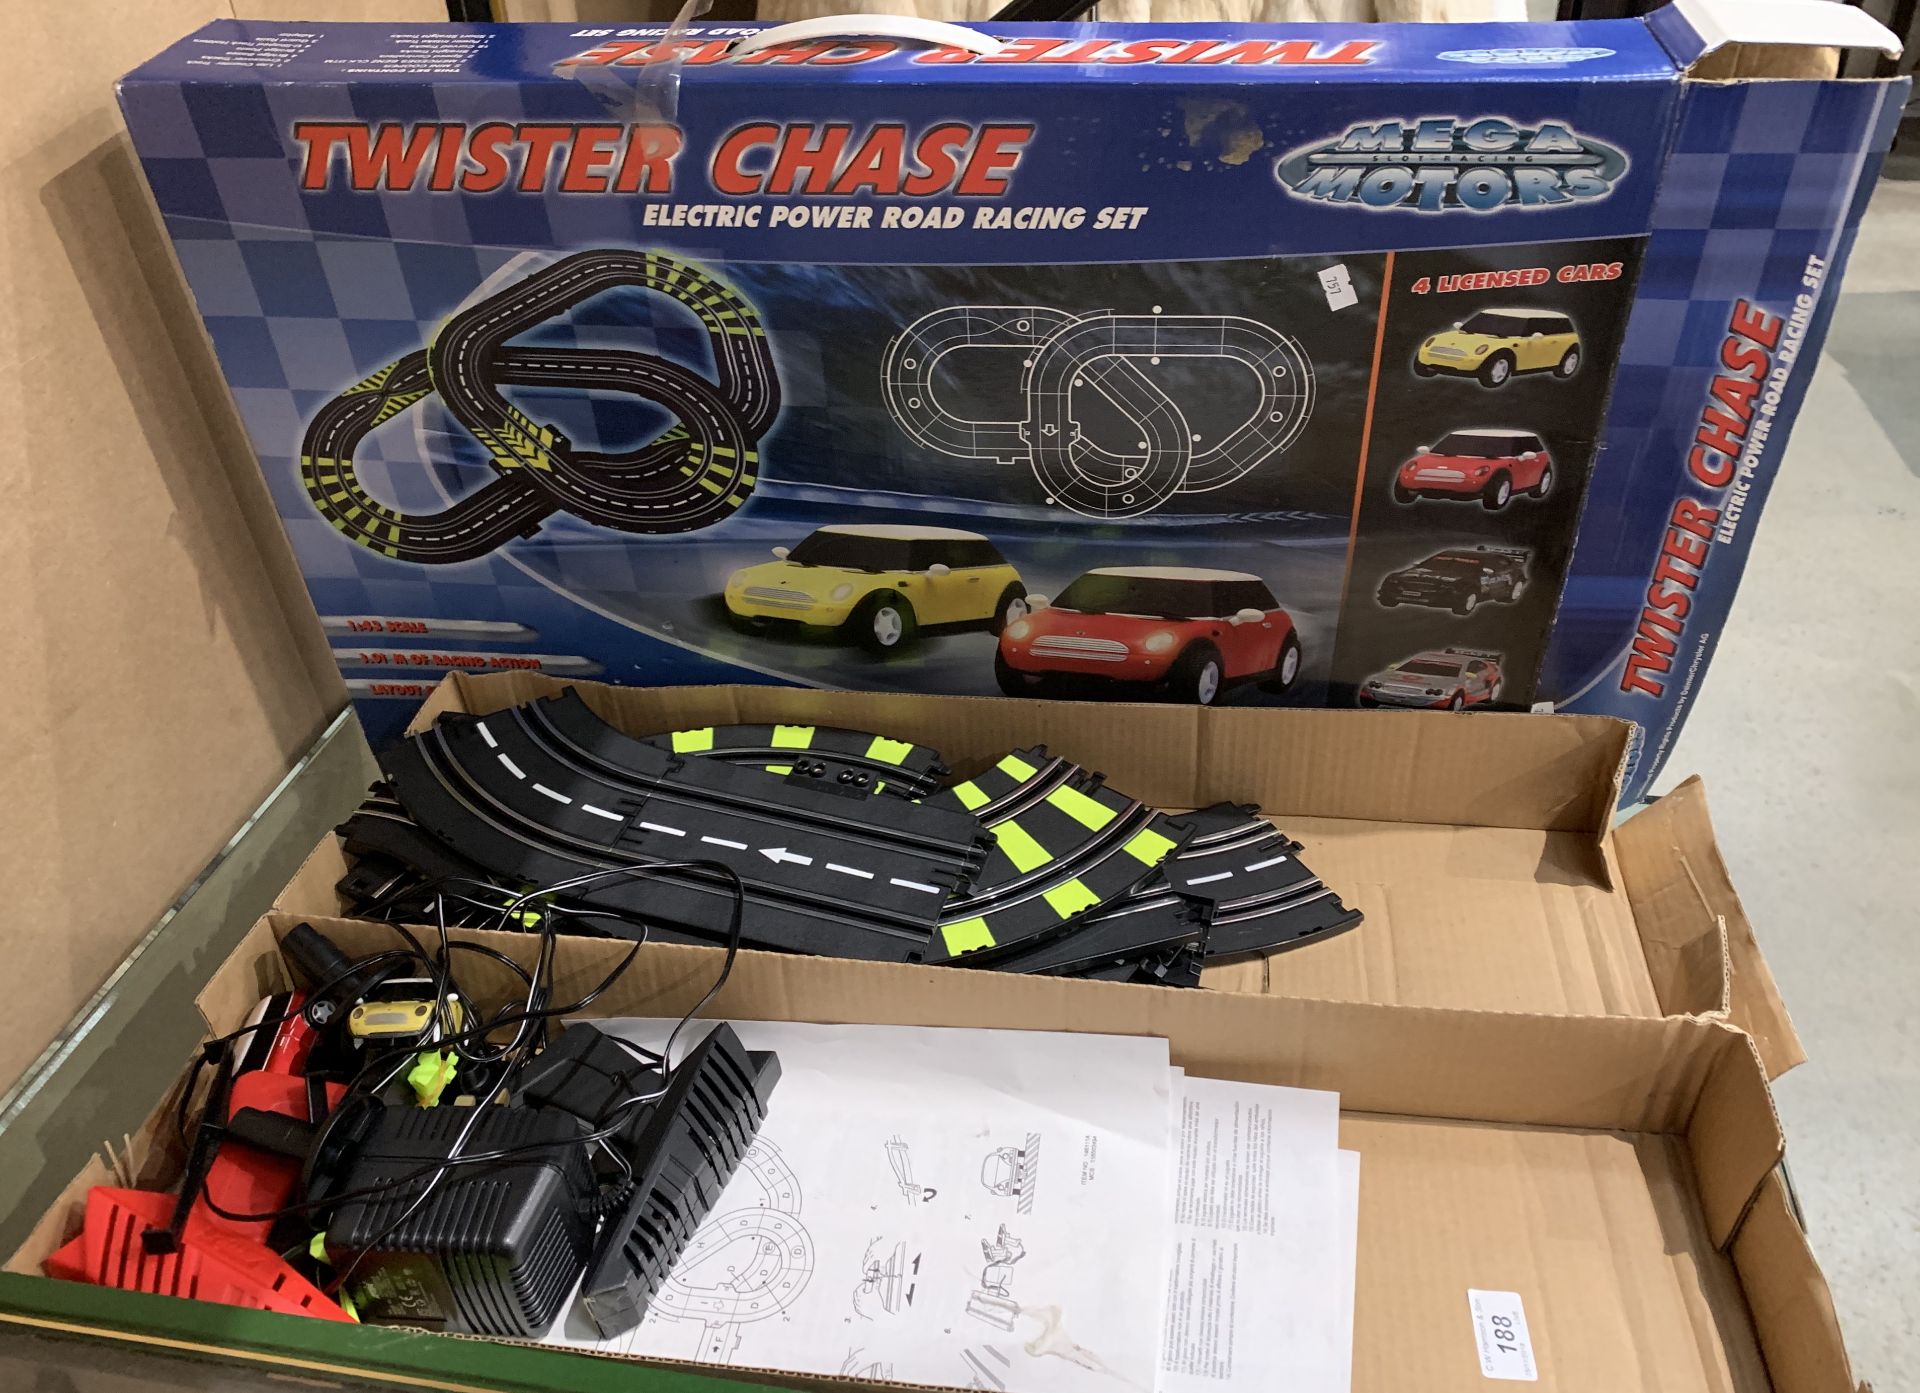 A Twister Chase electric power road racing set (boxed)